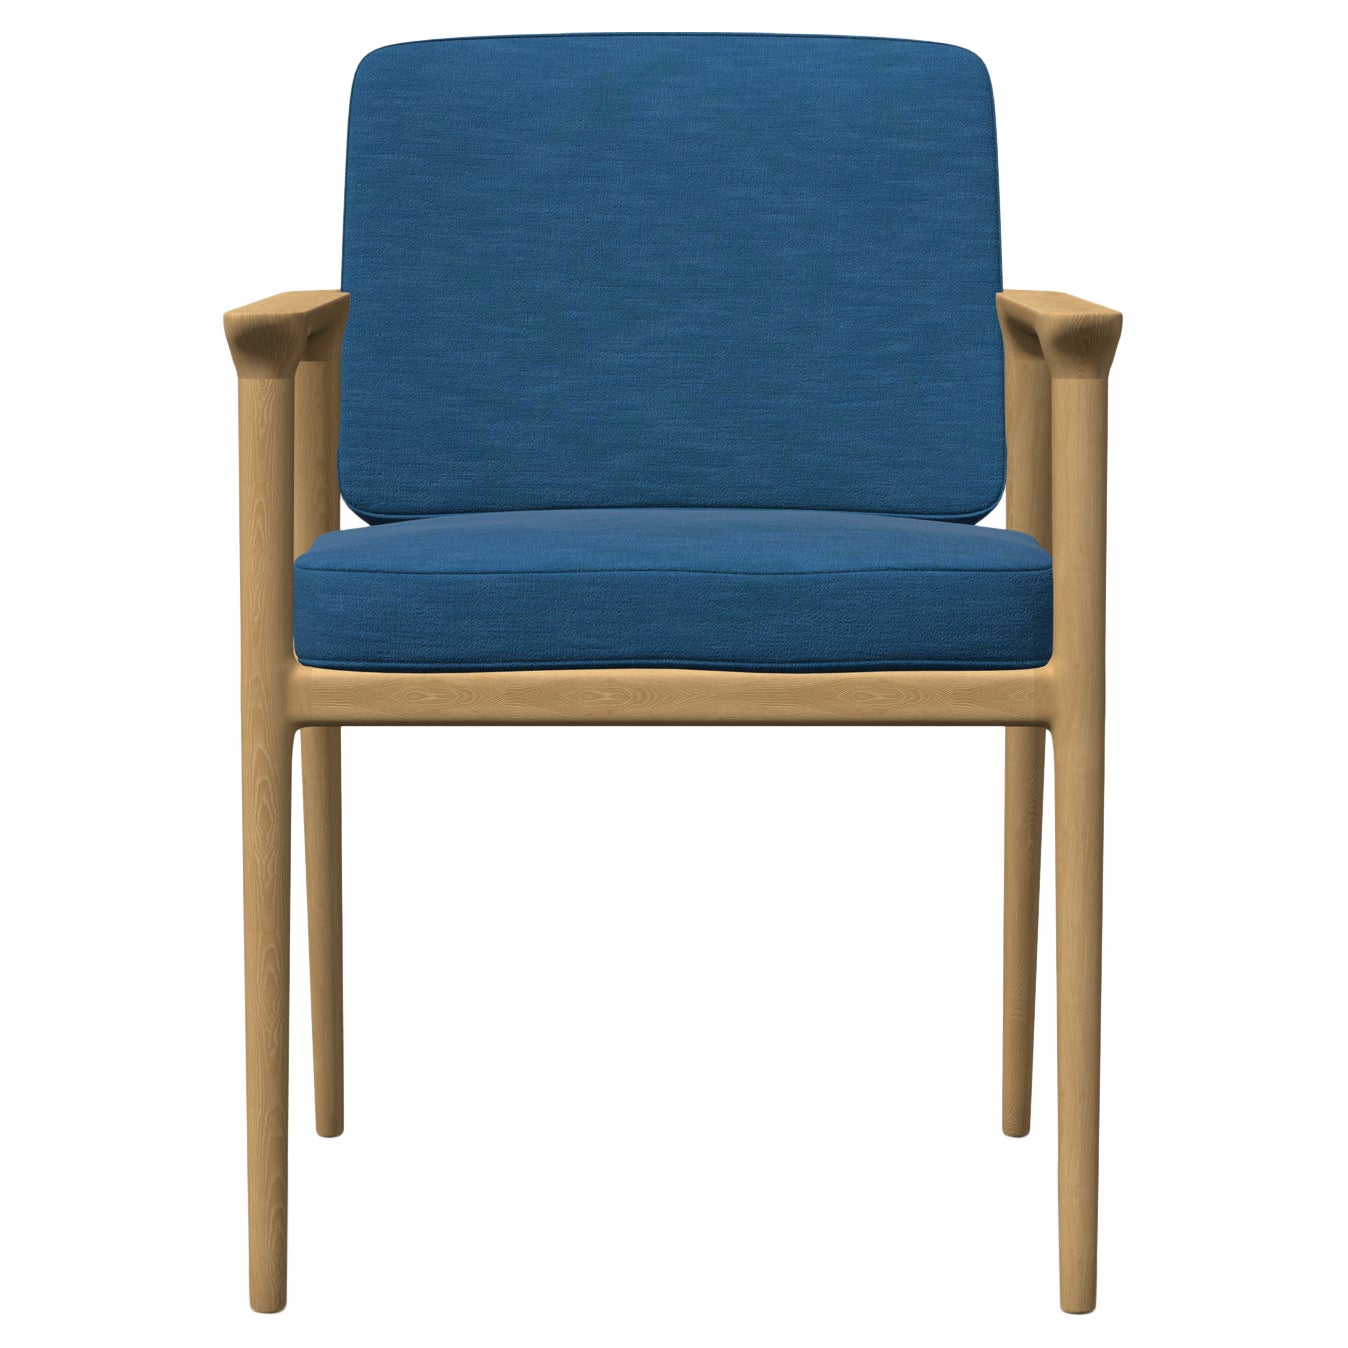 Moooi Zio Dining Chair in Denim Light Wash Upholstery with Oak Natural Oil Frame For Sale